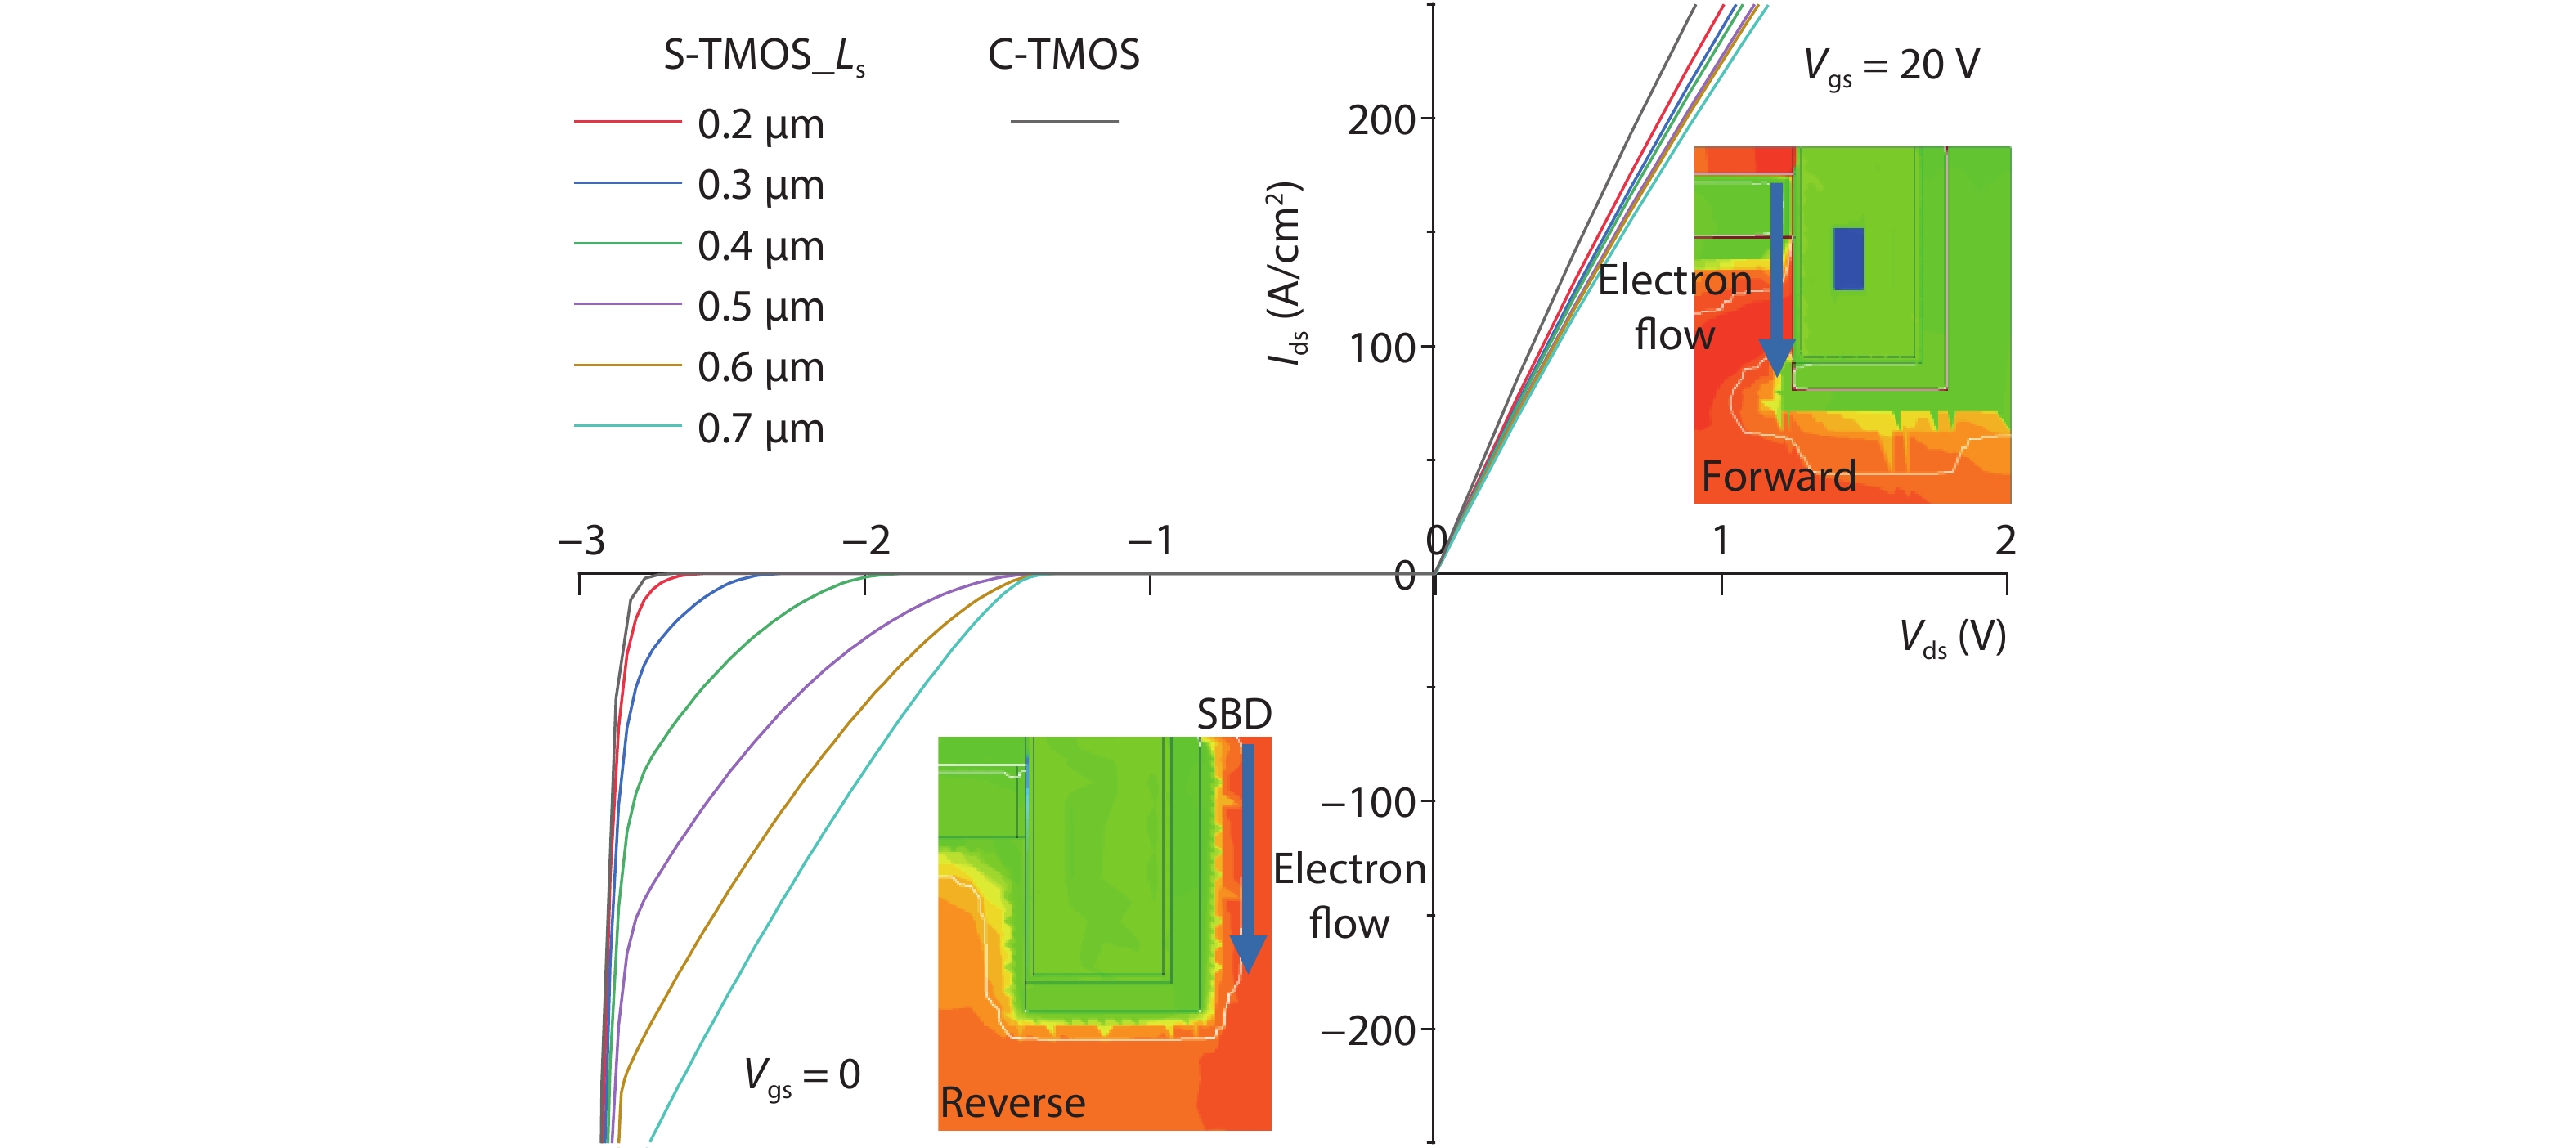 (Color online) Forward and reverse conduction I–V characteristics of C-TMOS and S-TMOS with varied Ls. The insets show the forward and reverse current contours of S-TMOS at Vds = +/– 2 V.